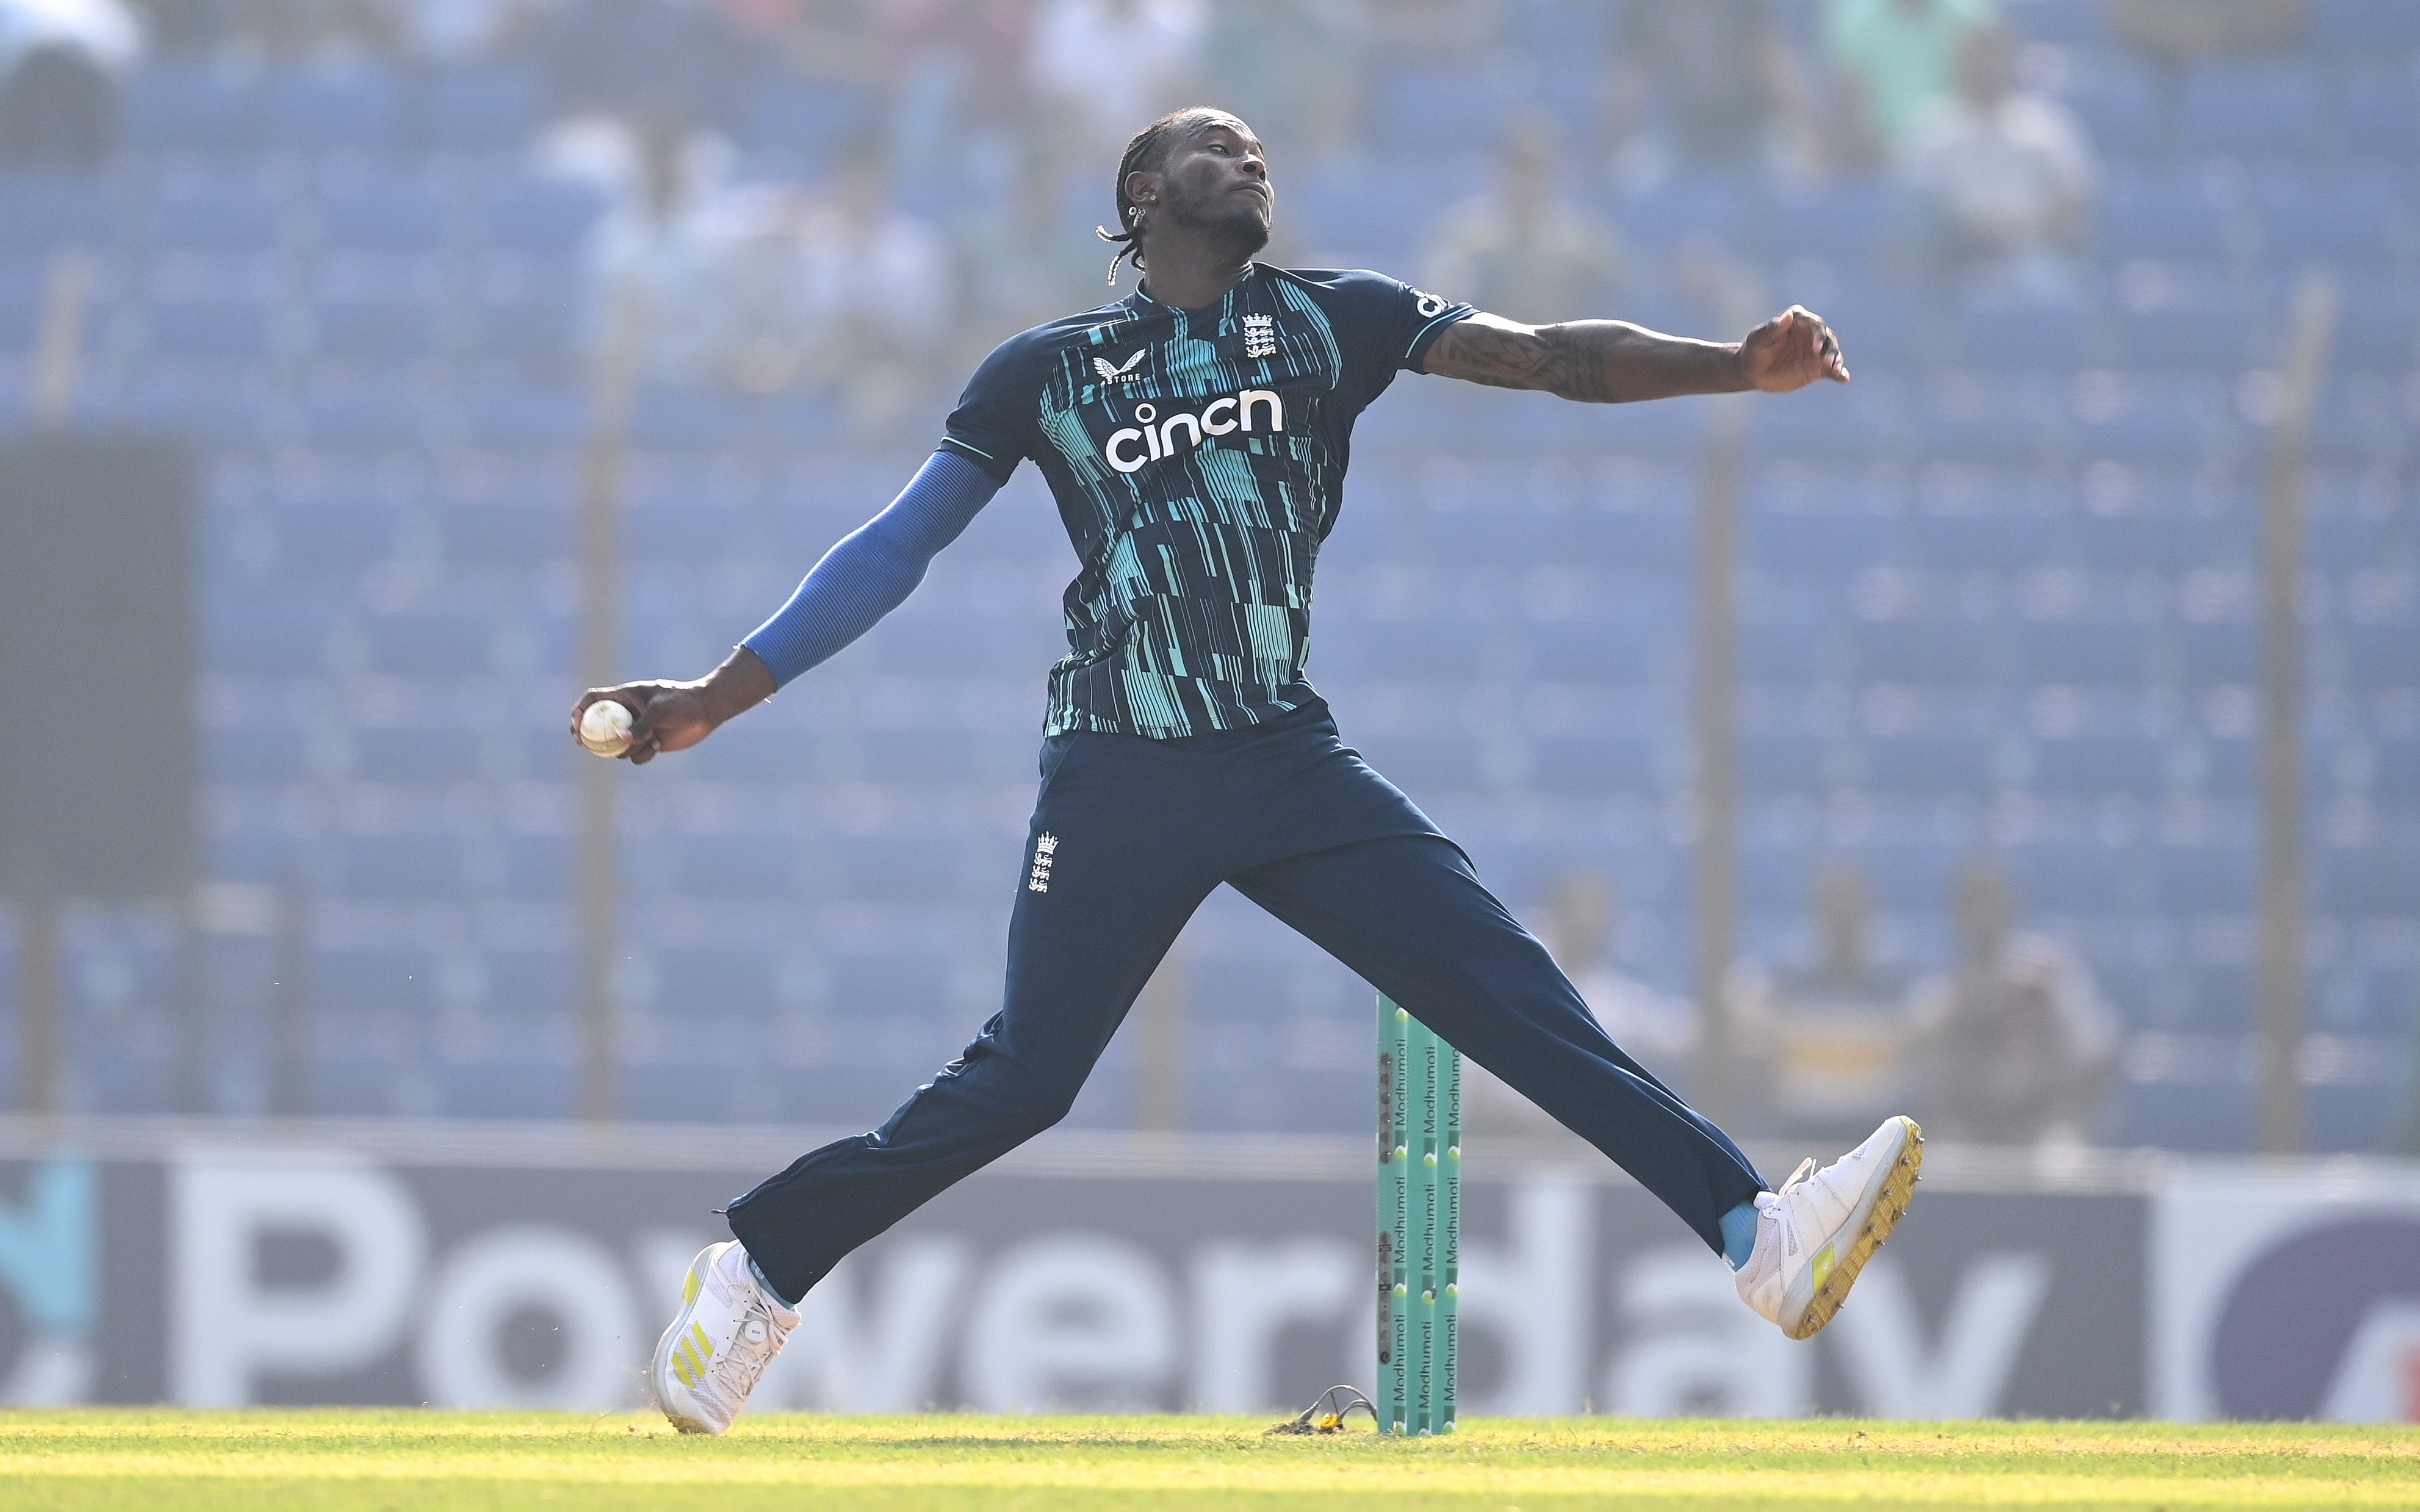 Jofra Archer is a bowler capable of reaching speeds over 93mph